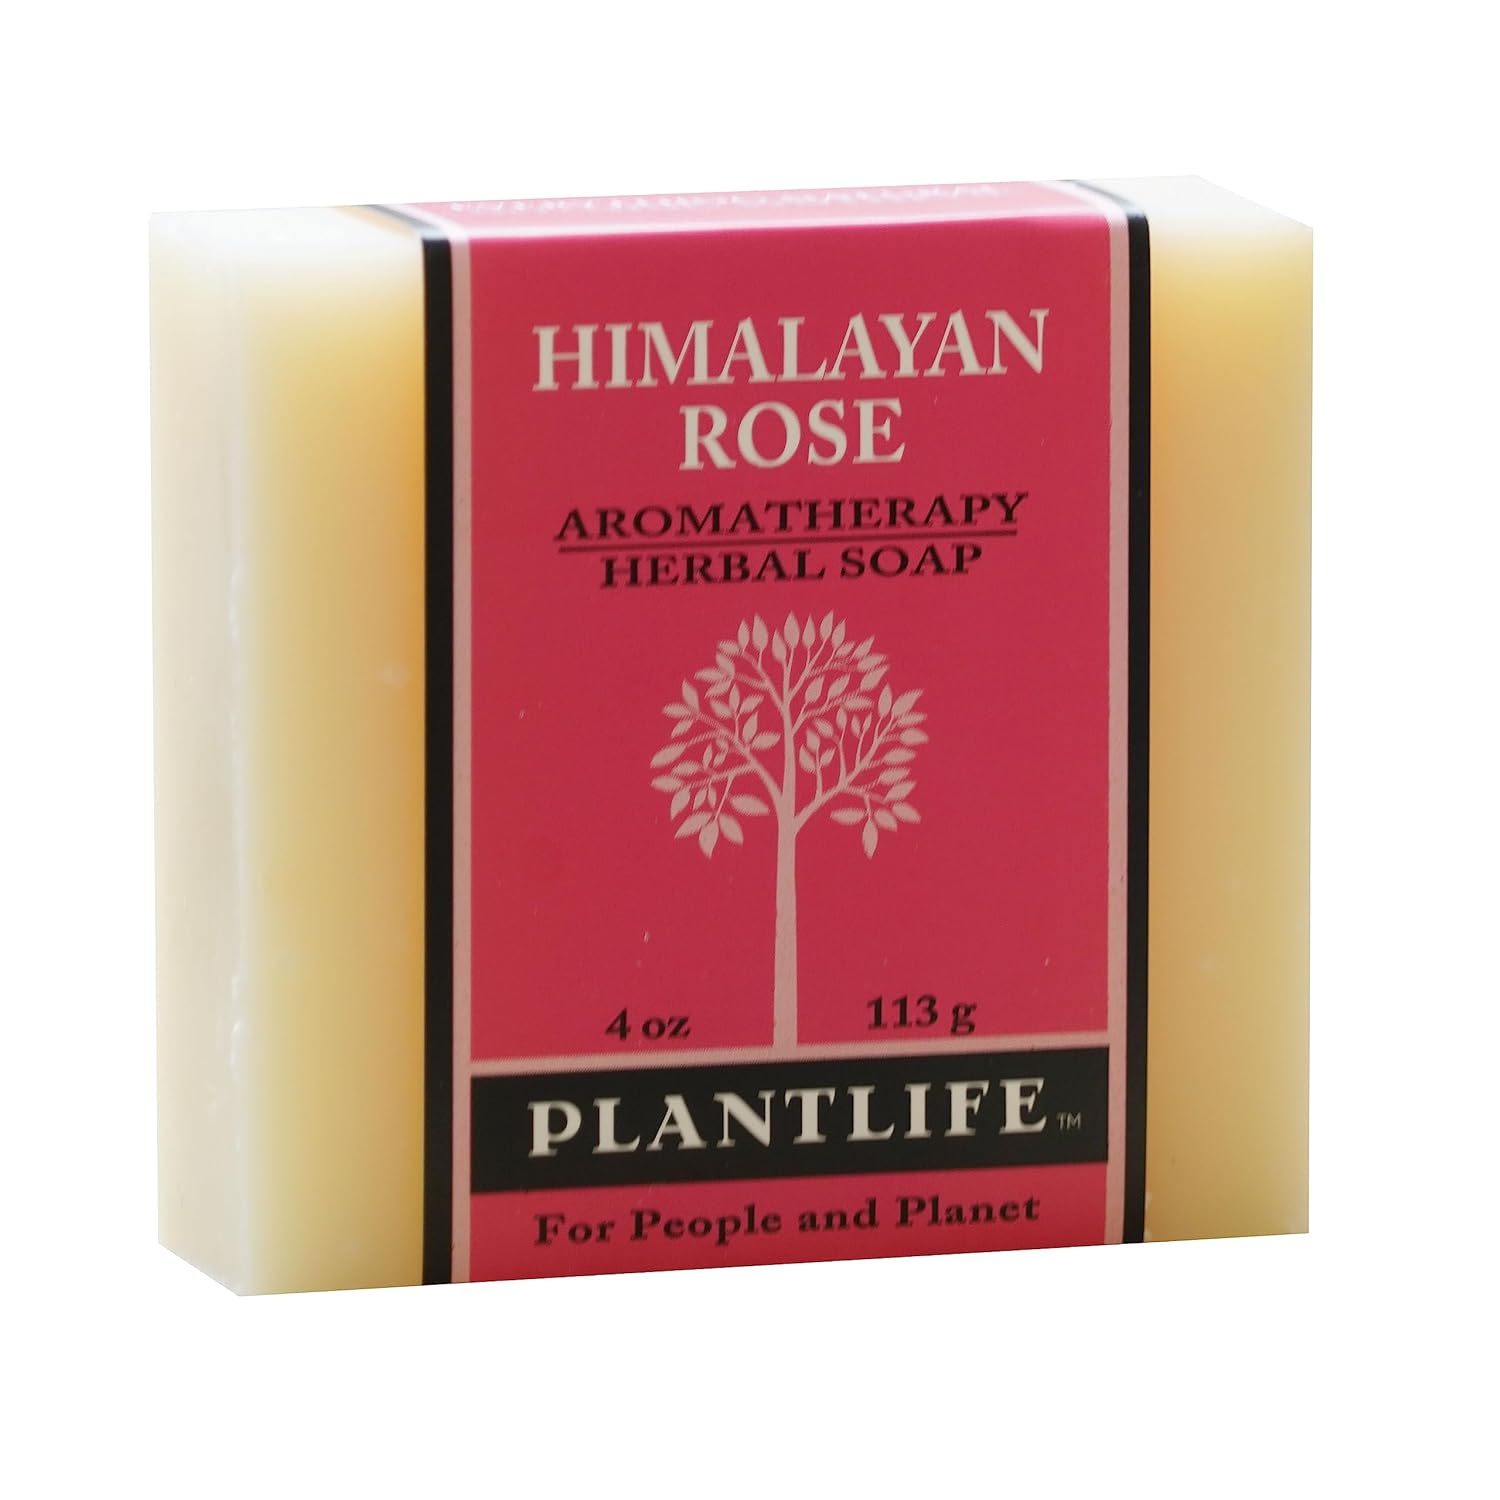 Plantlife Himalayan Rose Bar Soap - Moisturizing and Soothing Soap for Your Skin - Hand Crafted Using Plant-Based Ingredients - Made in California 4  Bar